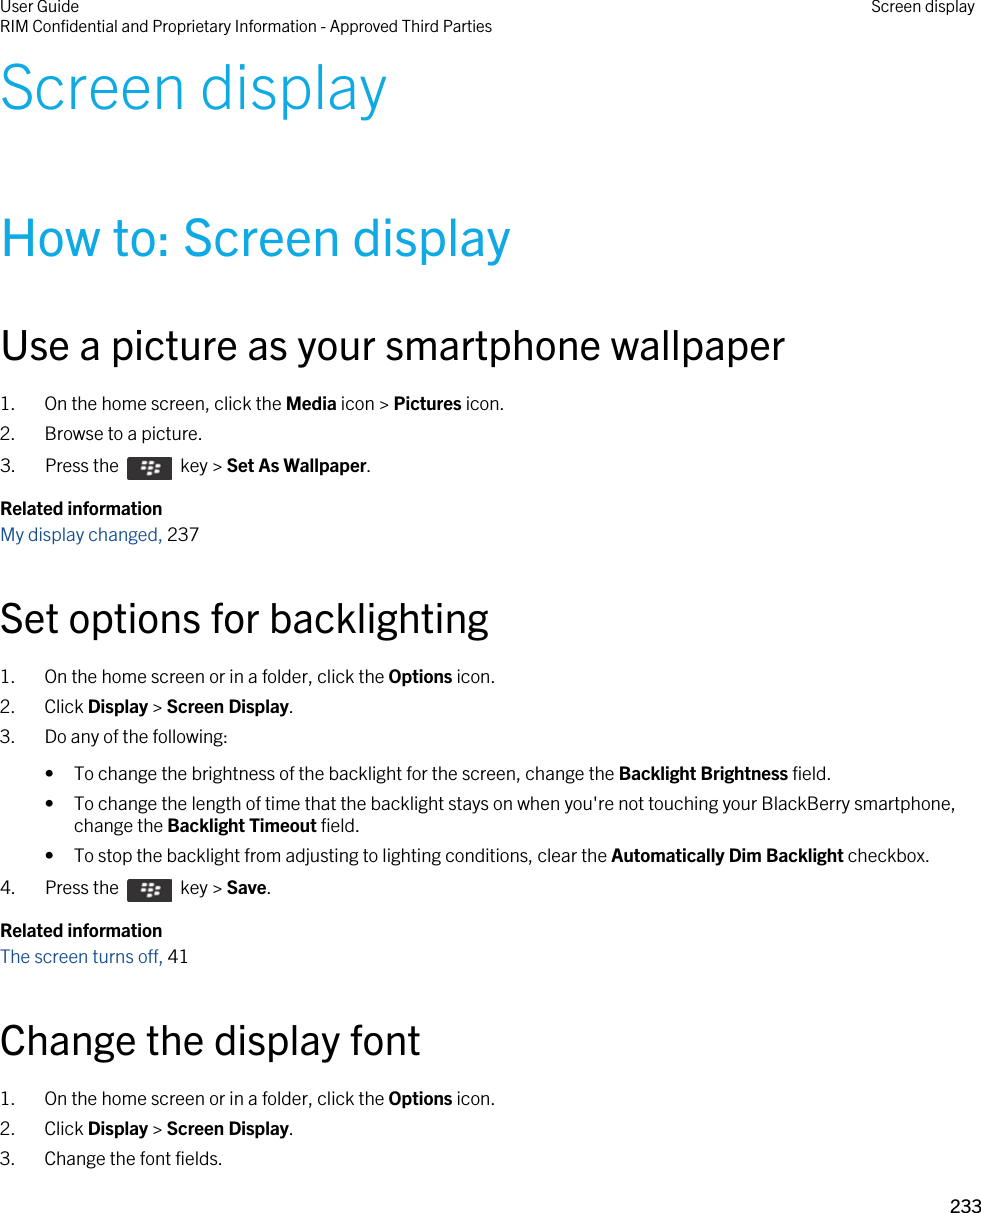 Screen displayHow to: Screen displayUse a picture as your smartphone wallpaper1. On the home screen, click the Media icon &gt; Pictures icon.2. Browse to a picture.3.  Press the    key &gt; Set As Wallpaper. Related informationMy display changed, 237Set options for backlighting1. On the home screen or in a folder, click the Options icon.2. Click Display &gt; Screen Display.3. Do any of the following:• To change the brightness of the backlight for the screen, change the Backlight Brightness field.• To change the length of time that the backlight stays on when you&apos;re not touching your BlackBerry smartphone, change the Backlight Timeout field.• To stop the backlight from adjusting to lighting conditions, clear the Automatically Dim Backlight checkbox.4.  Press the    key &gt; Save. Related informationThe screen turns off, 41 Change the display font1. On the home screen or in a folder, click the Options icon.2. Click Display &gt; Screen Display.3. Change the font fields.User GuideRIM Confidential and Proprietary Information - Approved Third Parties Screen display233 